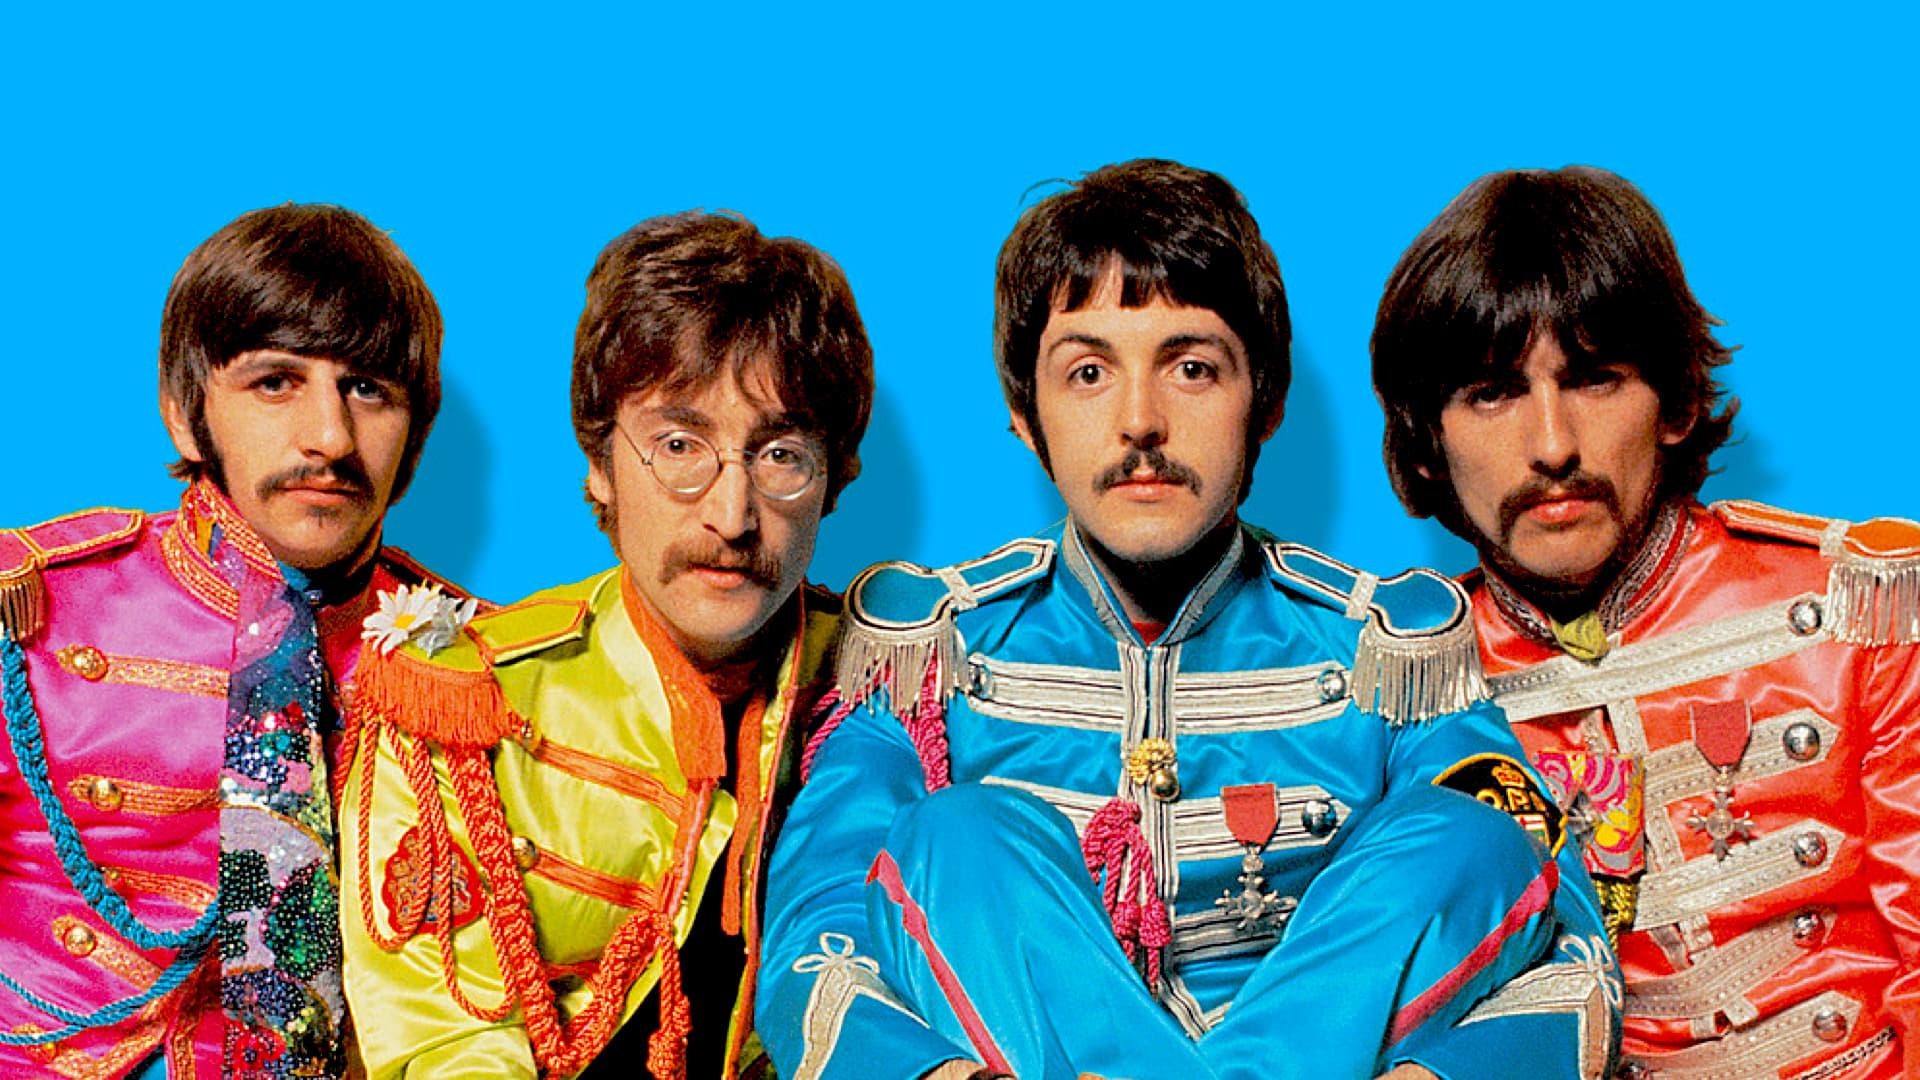 The Making of Sgt. Pepper backdrop